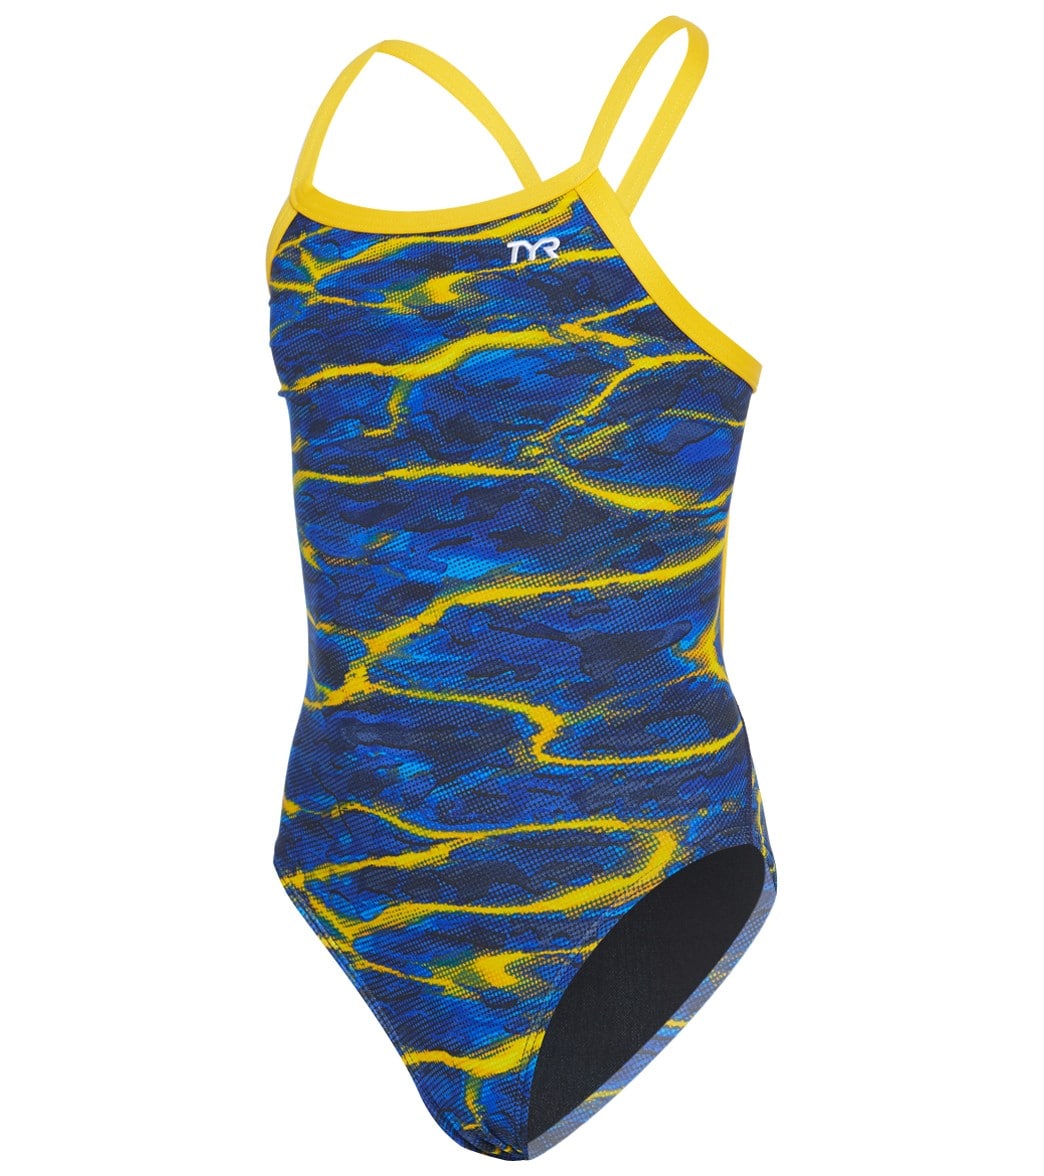 TYR Girls' Lambent Diamondfit One Piece Swimsuit - Navy/Gold 22 Polyester/Spandex - Swimoutlet.com